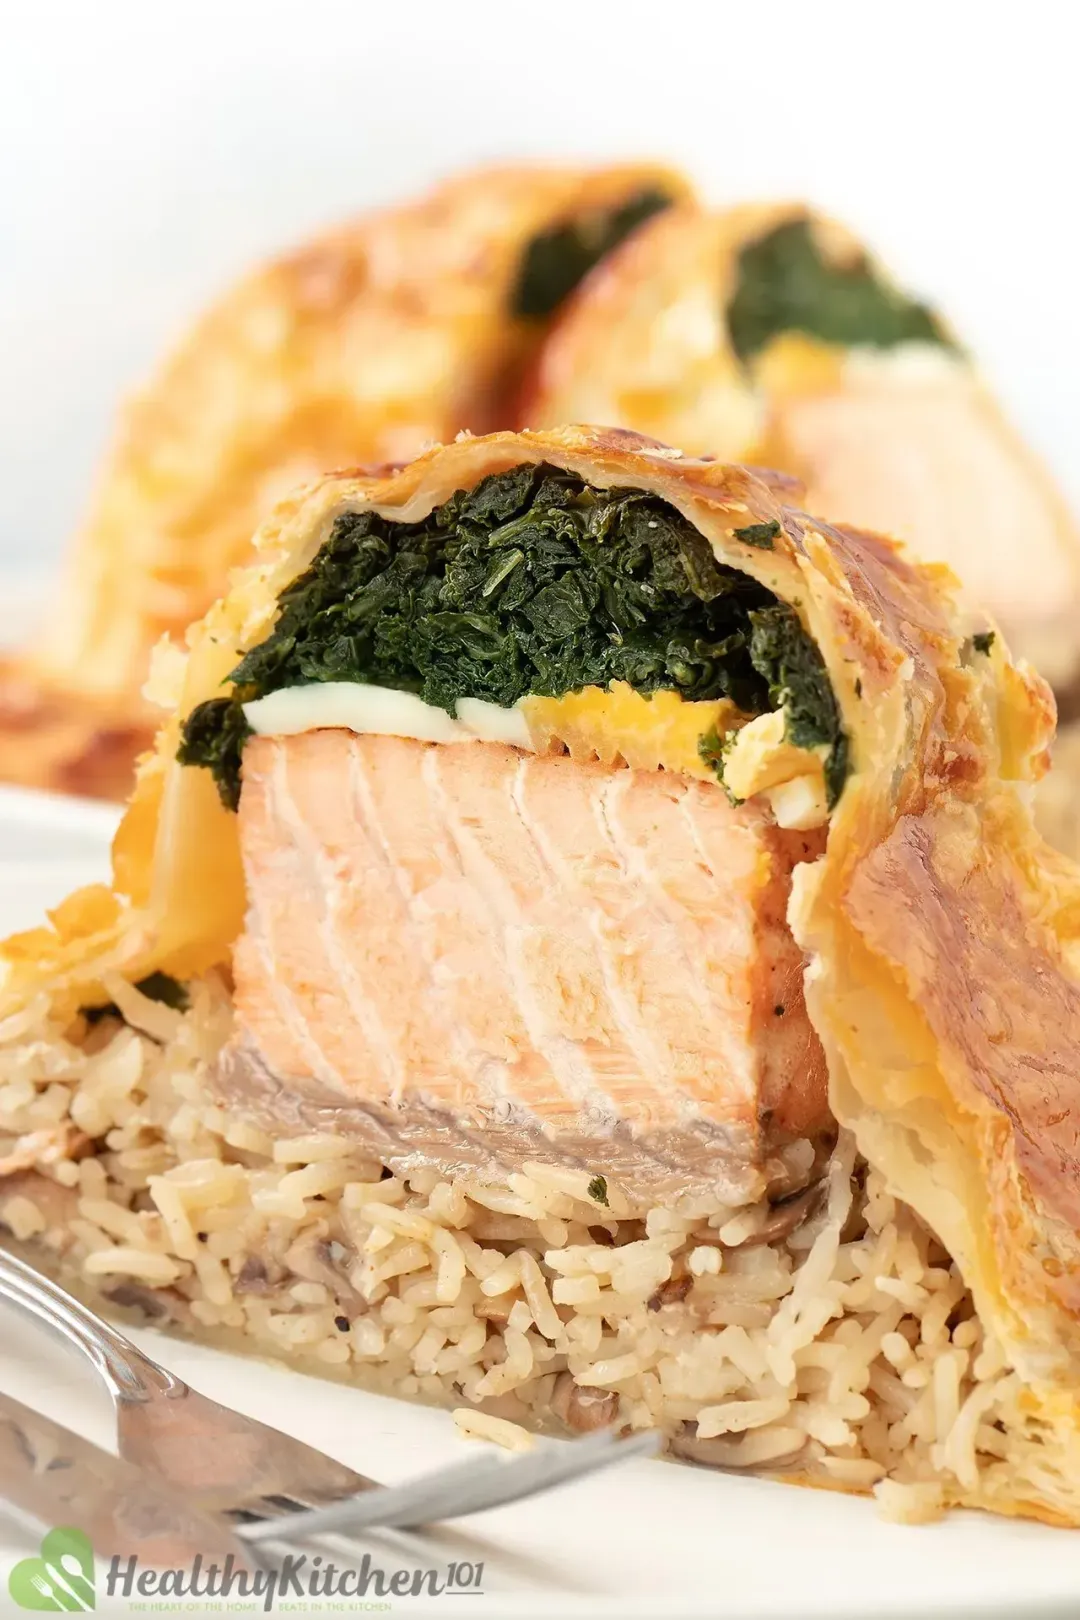 Layers of cooked kale, boiled eggs, salmon, and mushroom rice wrapped in pastry